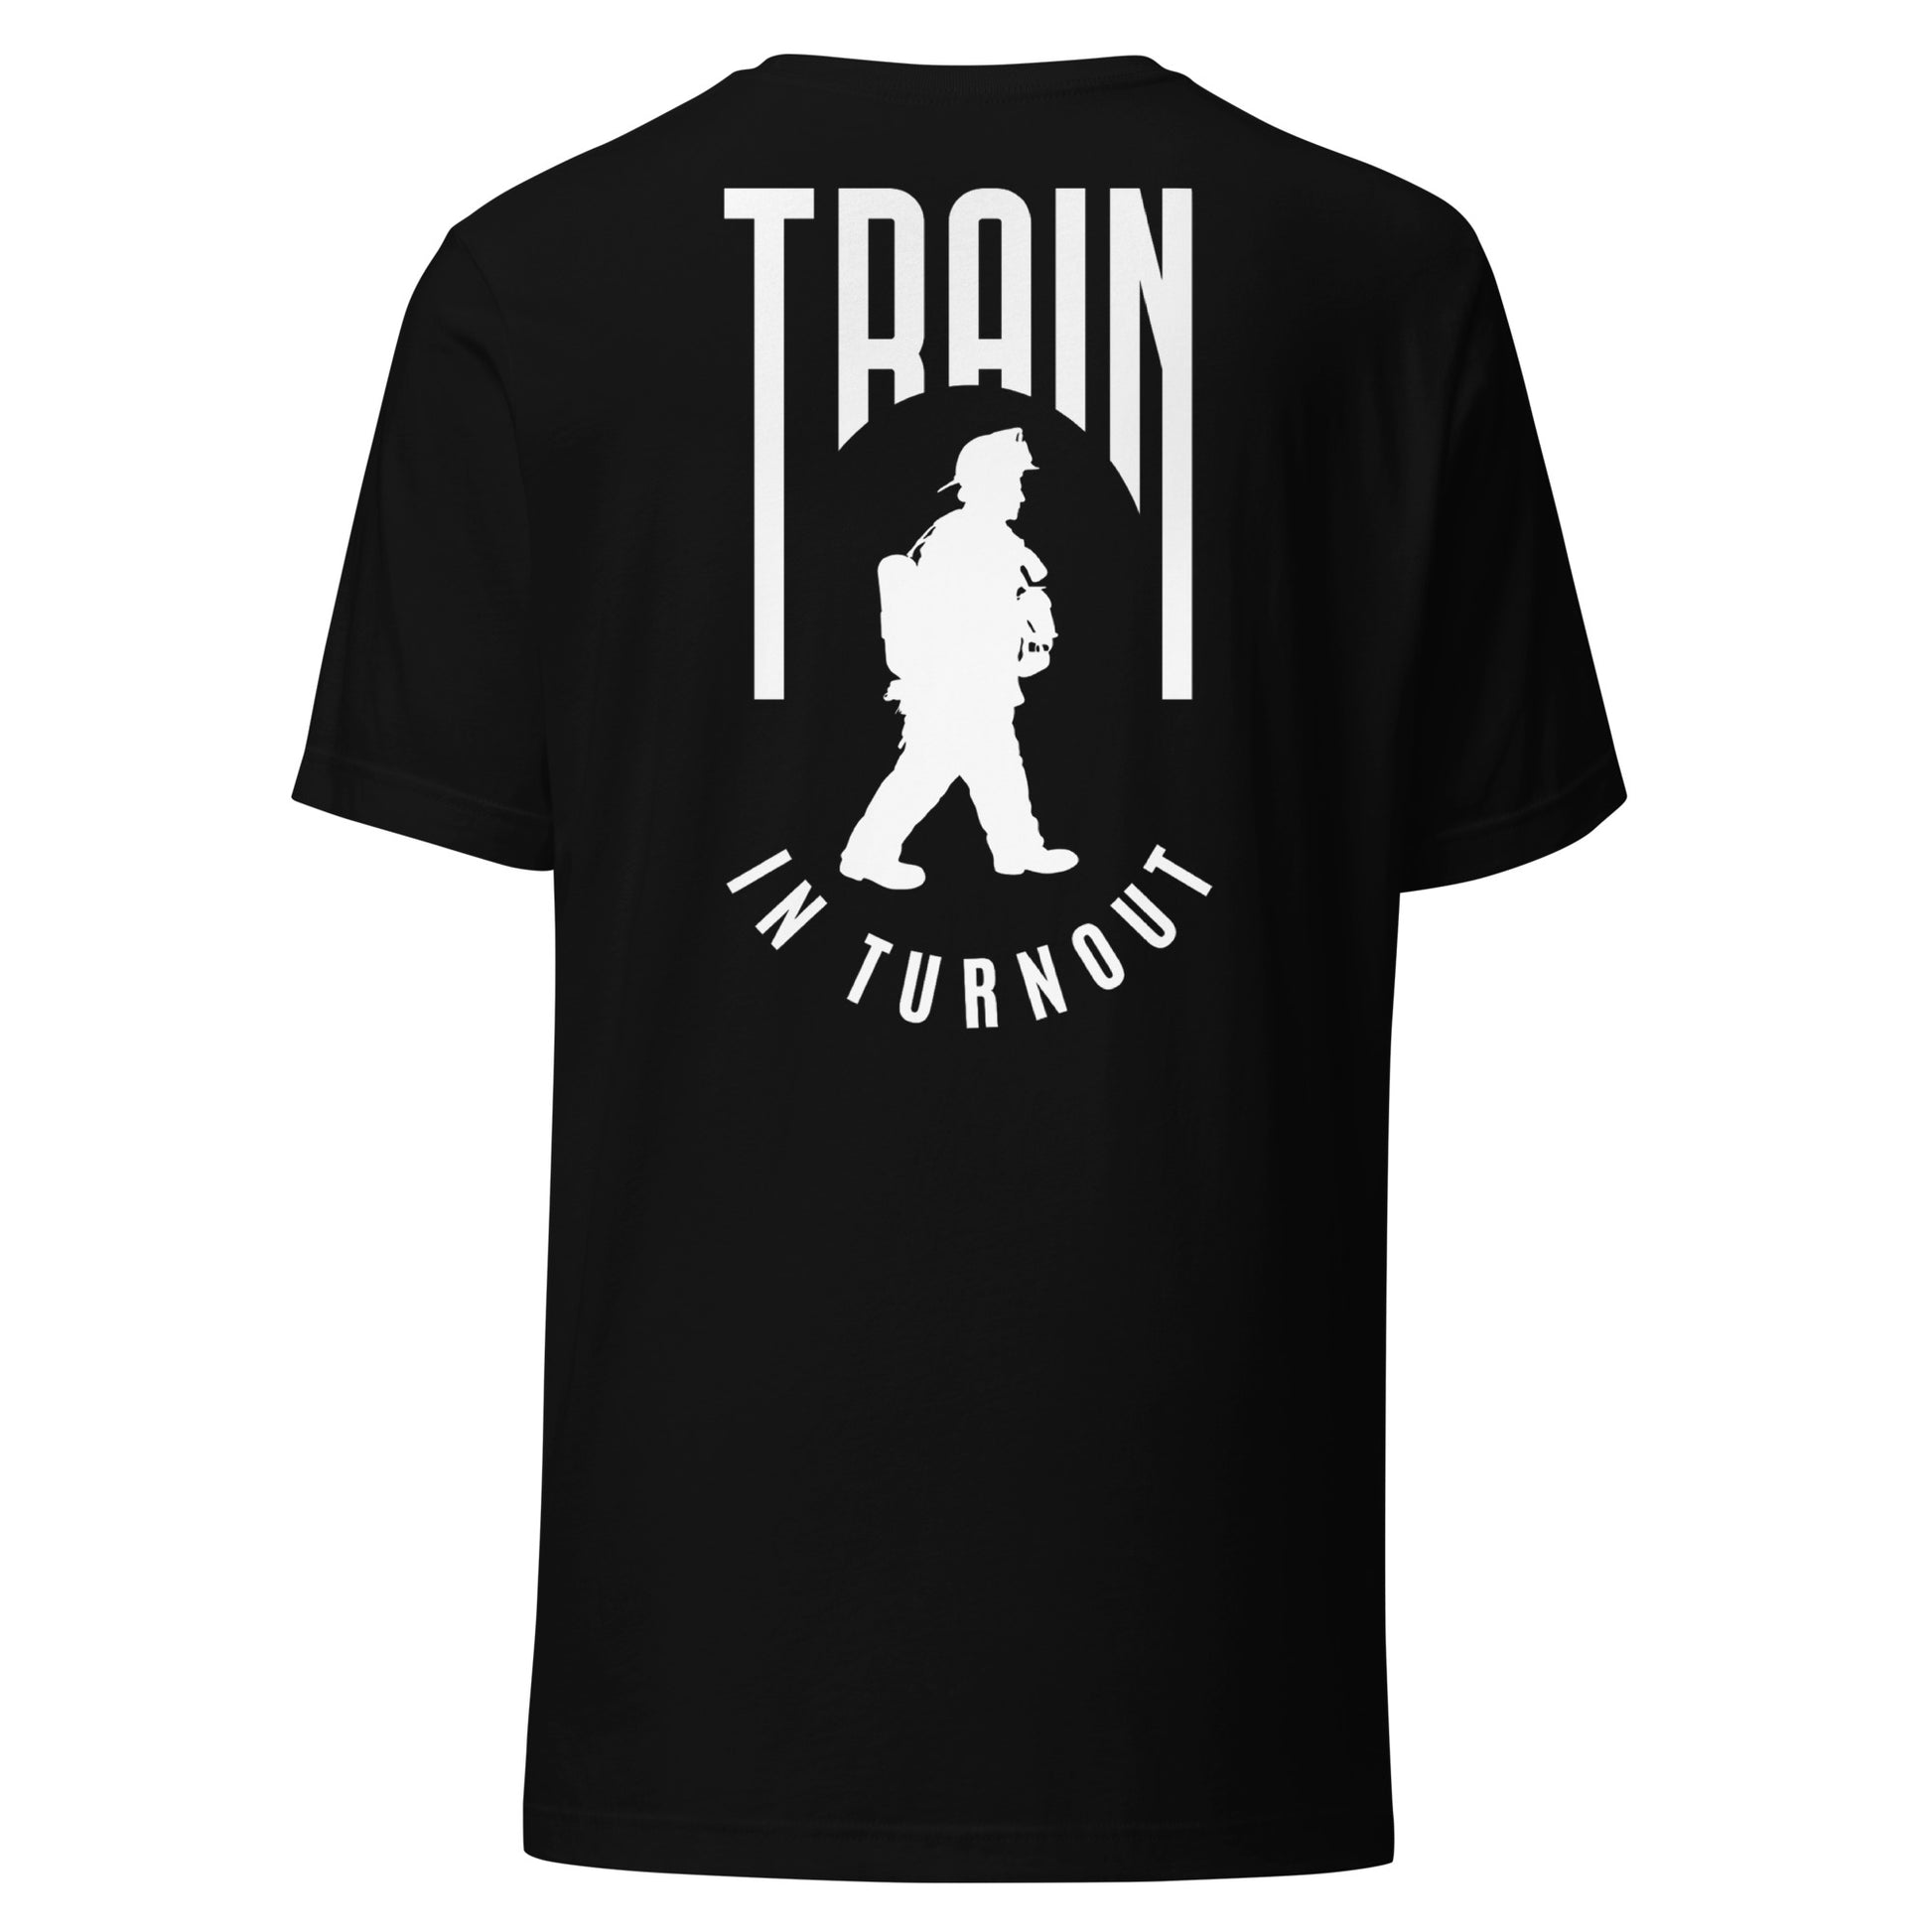 Train in Turnout Graphic Firefighter shirt, black and white.  